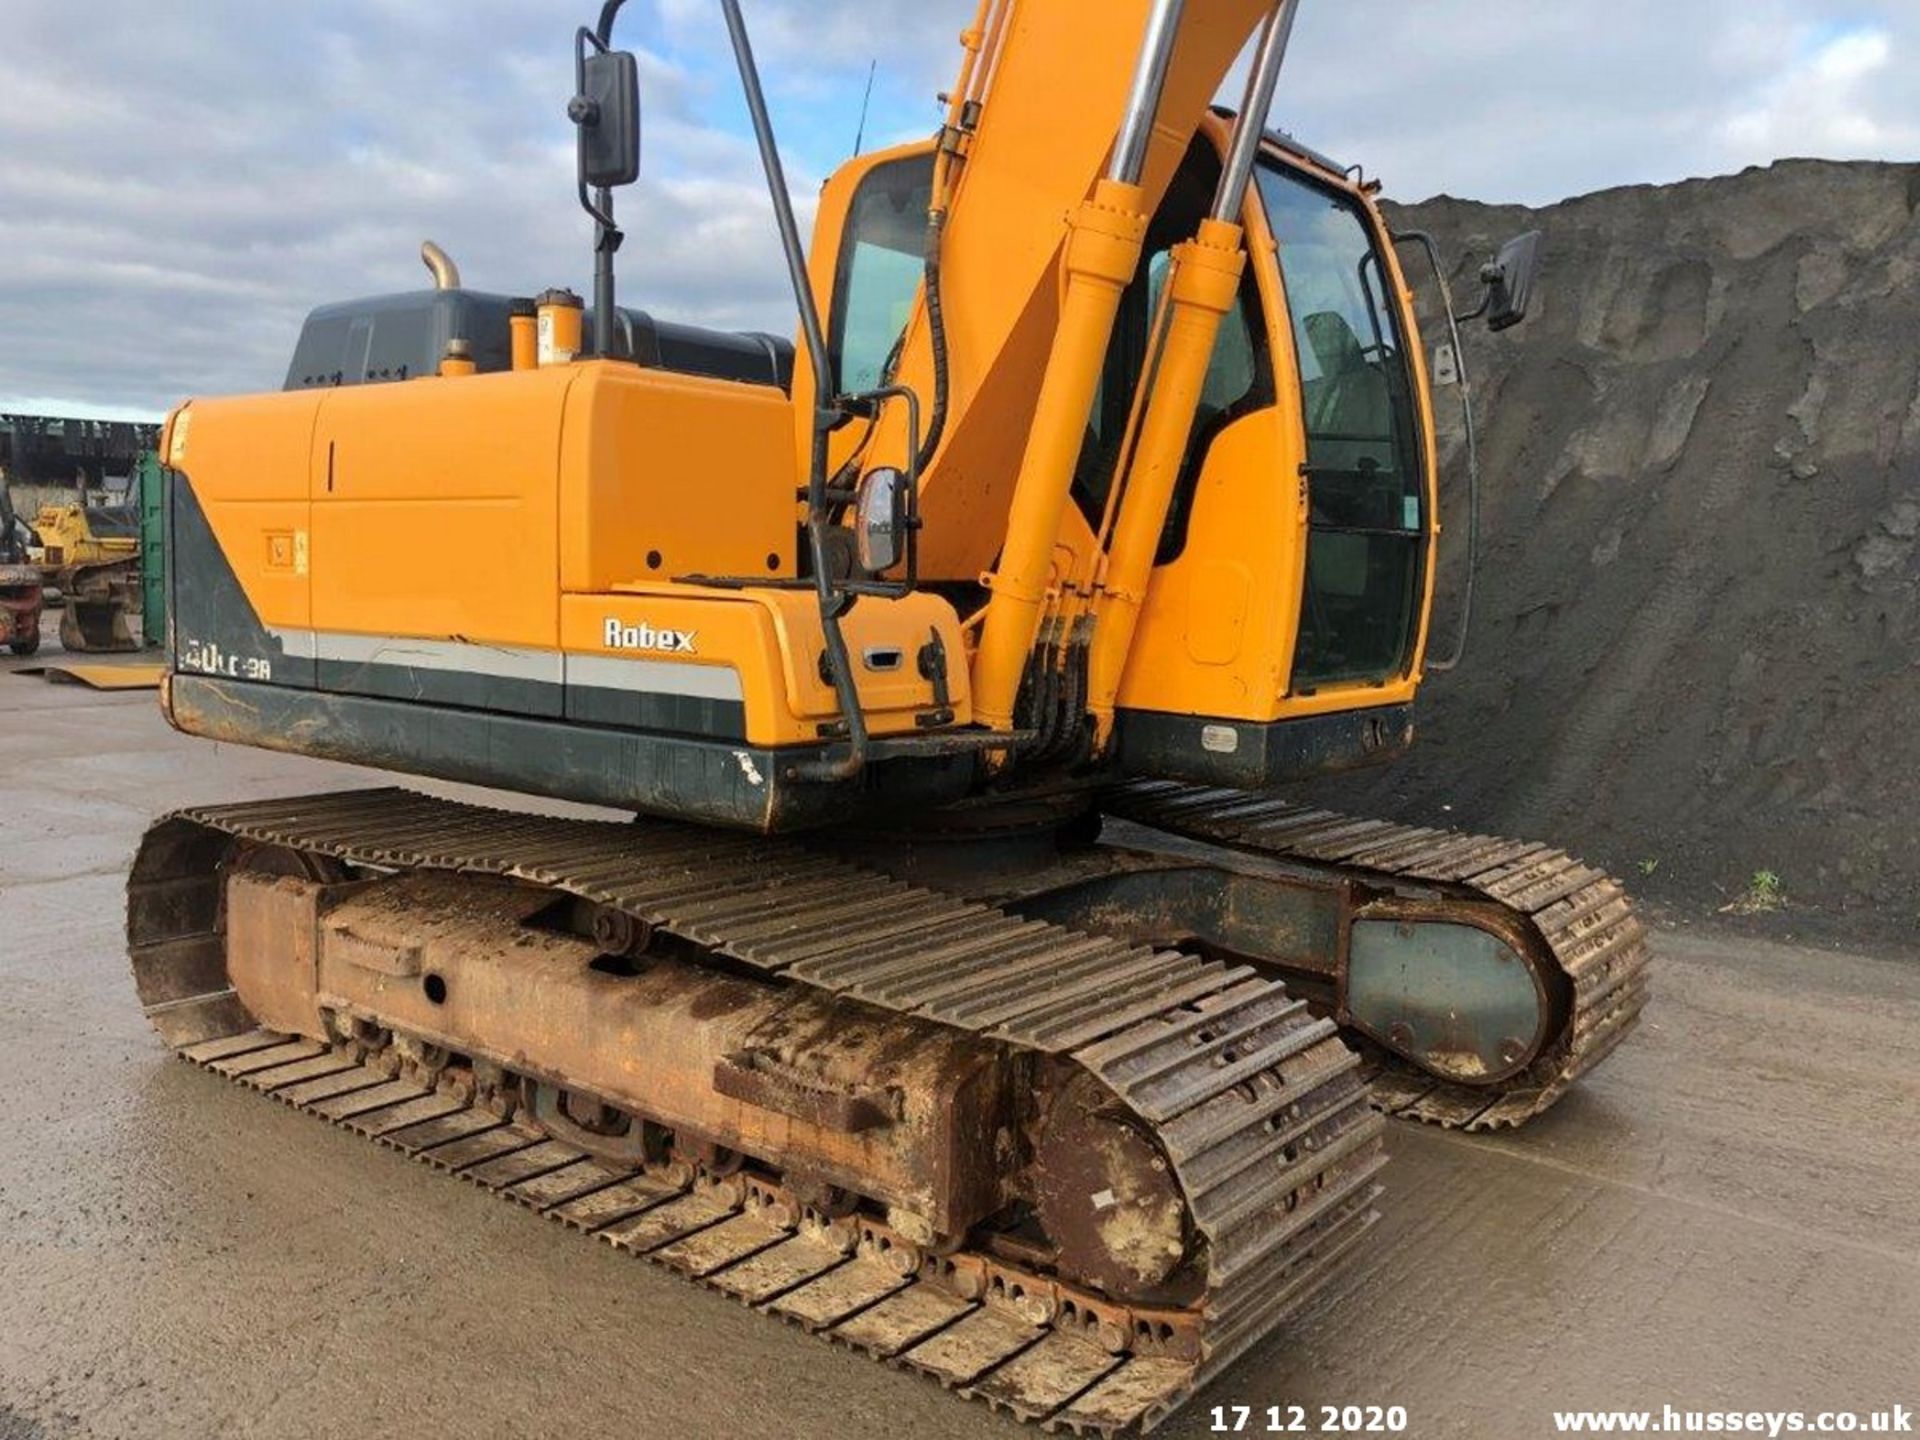 HYUNDAI ROBEX 140 LC-9A EXCAVATOR 2014 5507HRS C.W HAMMER CIRCUIT, HYDRAULIC HITCH & 2 BUCKETS - Image 7 of 19